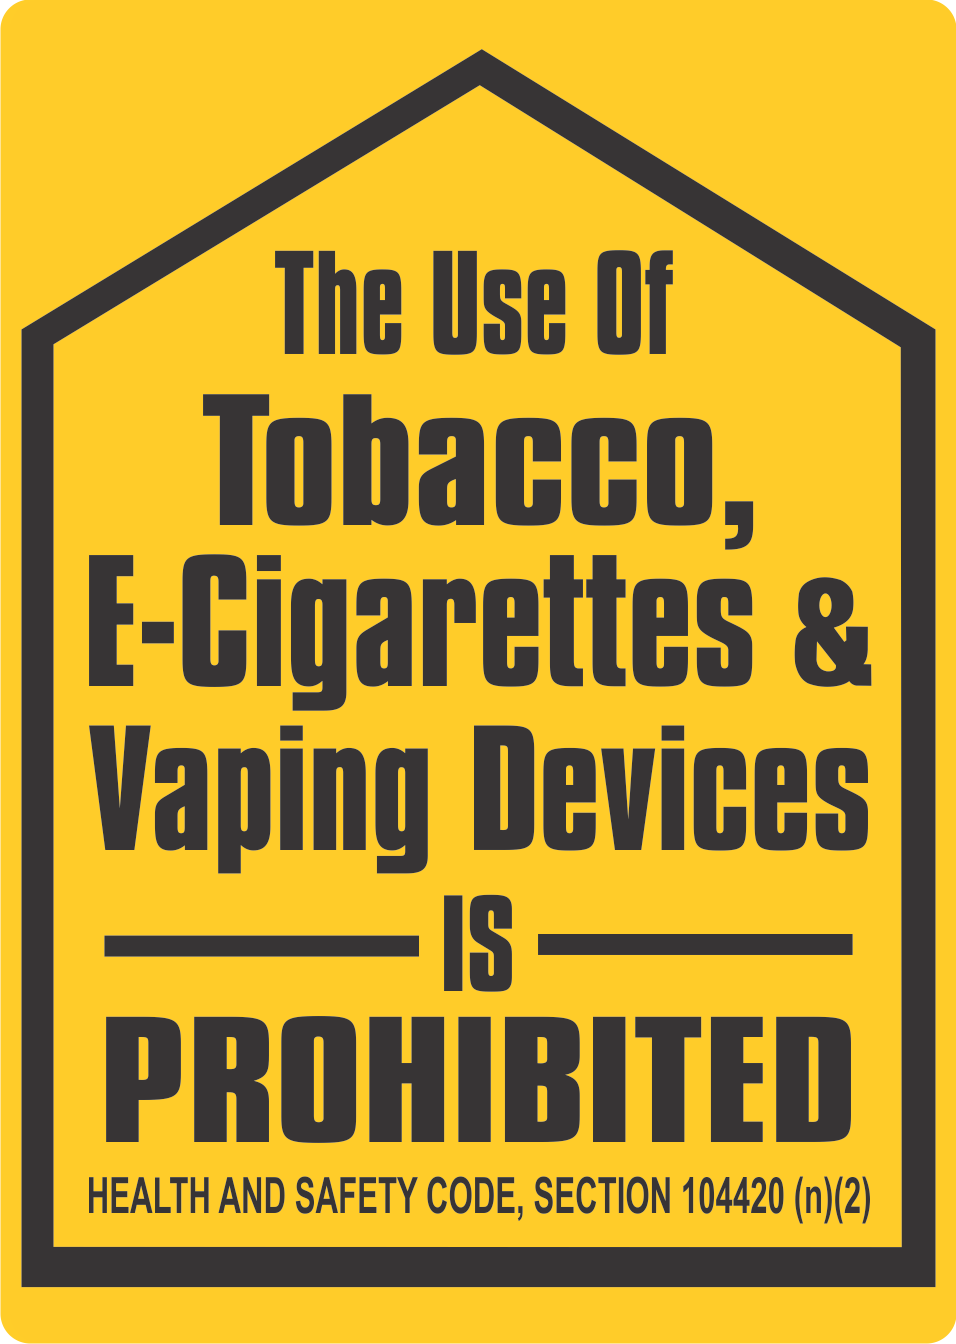 The use of tobacco, e-cigarettes and vaping devices is prohibited. Health and safety code, section 104420 (n)(2)